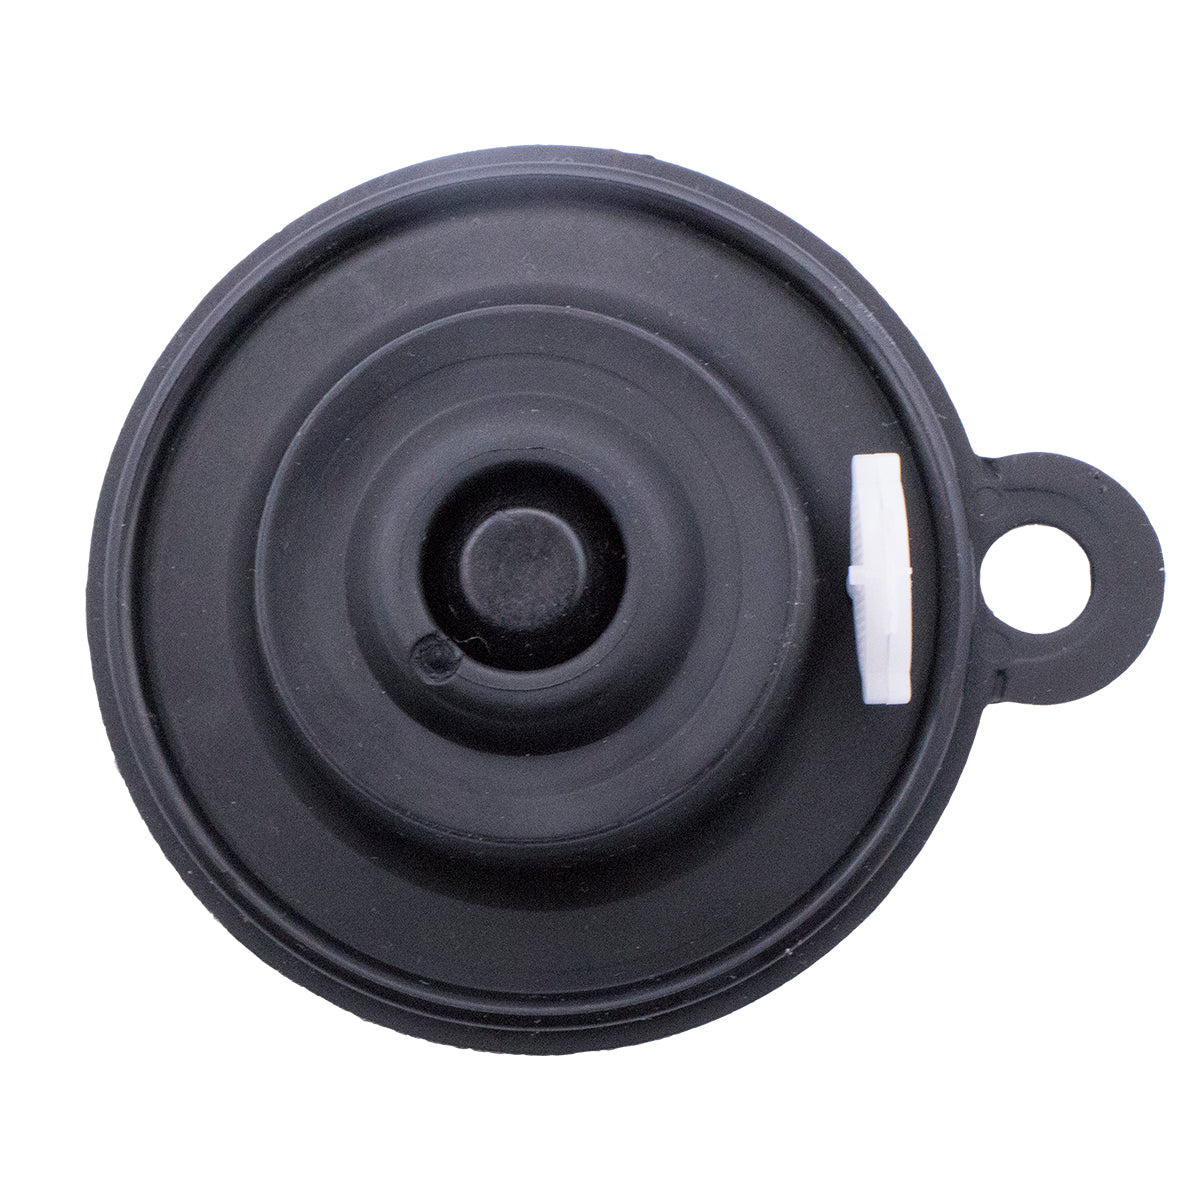 Replacement diaphragm for Heavy Duty Valves